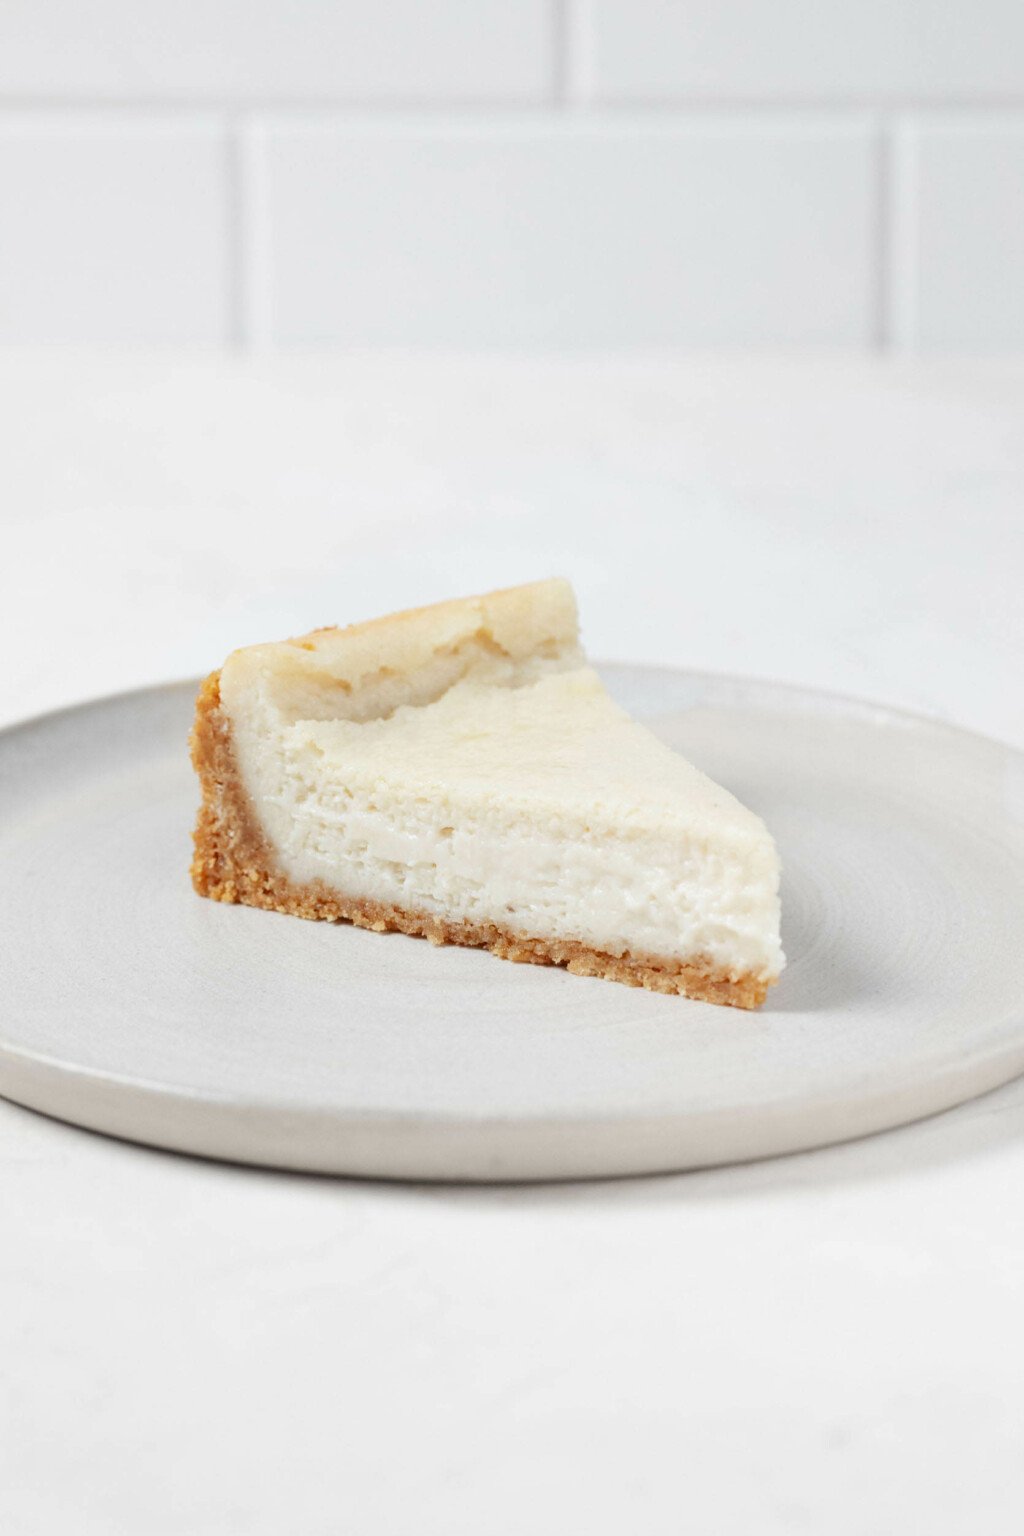 A slice of ultra creamy vegan cheesecake is resting on a round plate.